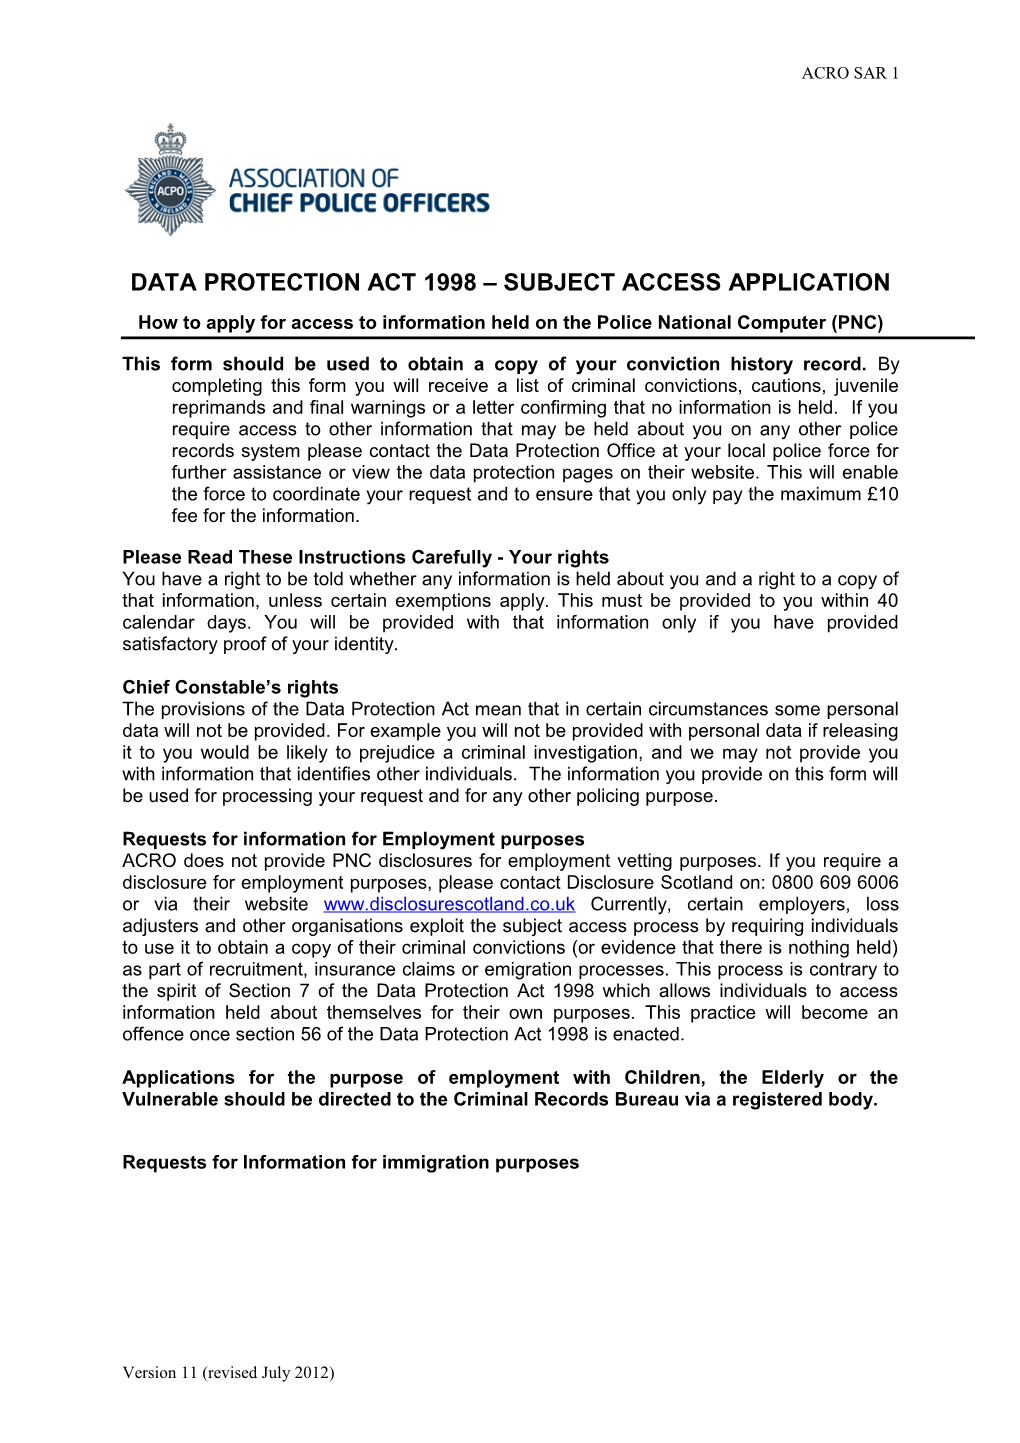 Data Protection Act 1998 Subject Access Application